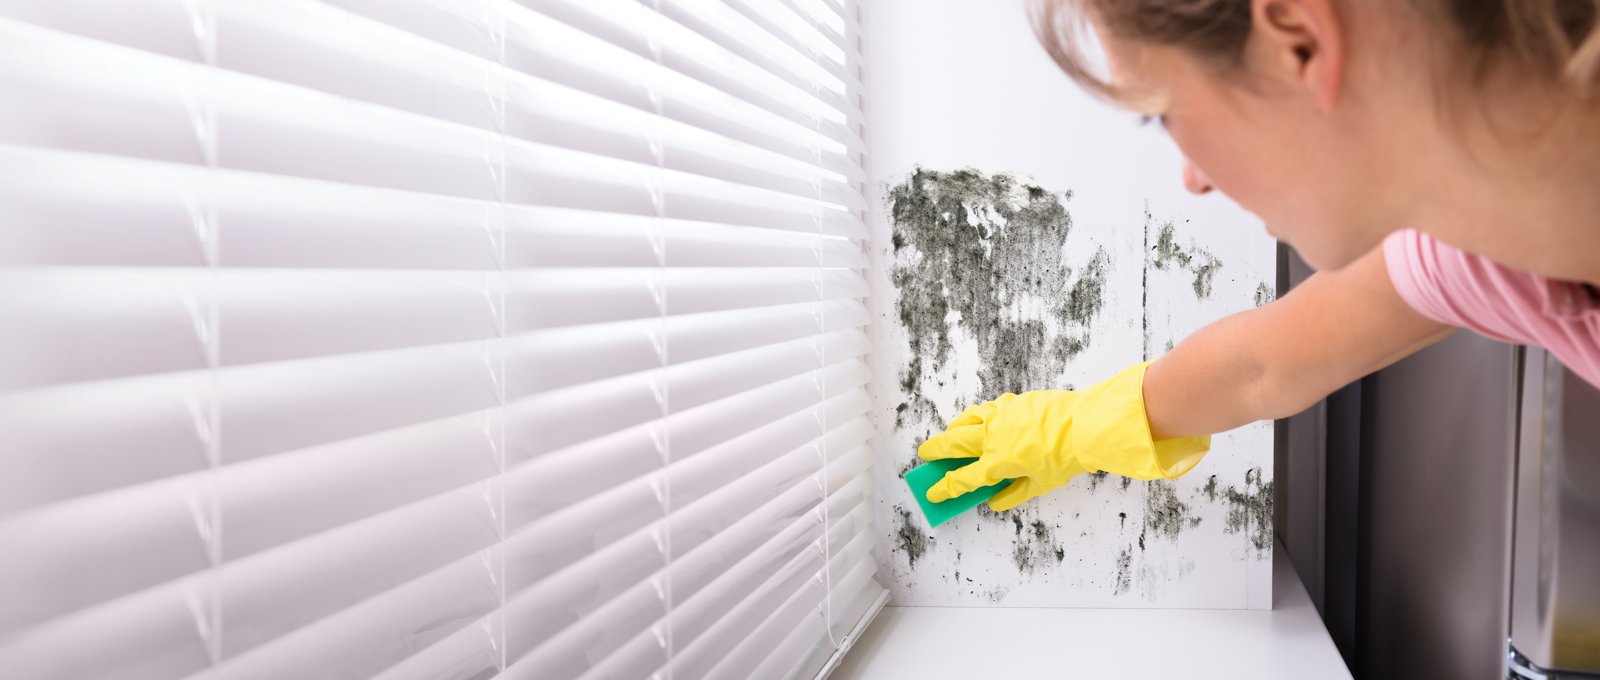 Photograph of a woman cleaning mould from a wall by a window covered with a venetian blind